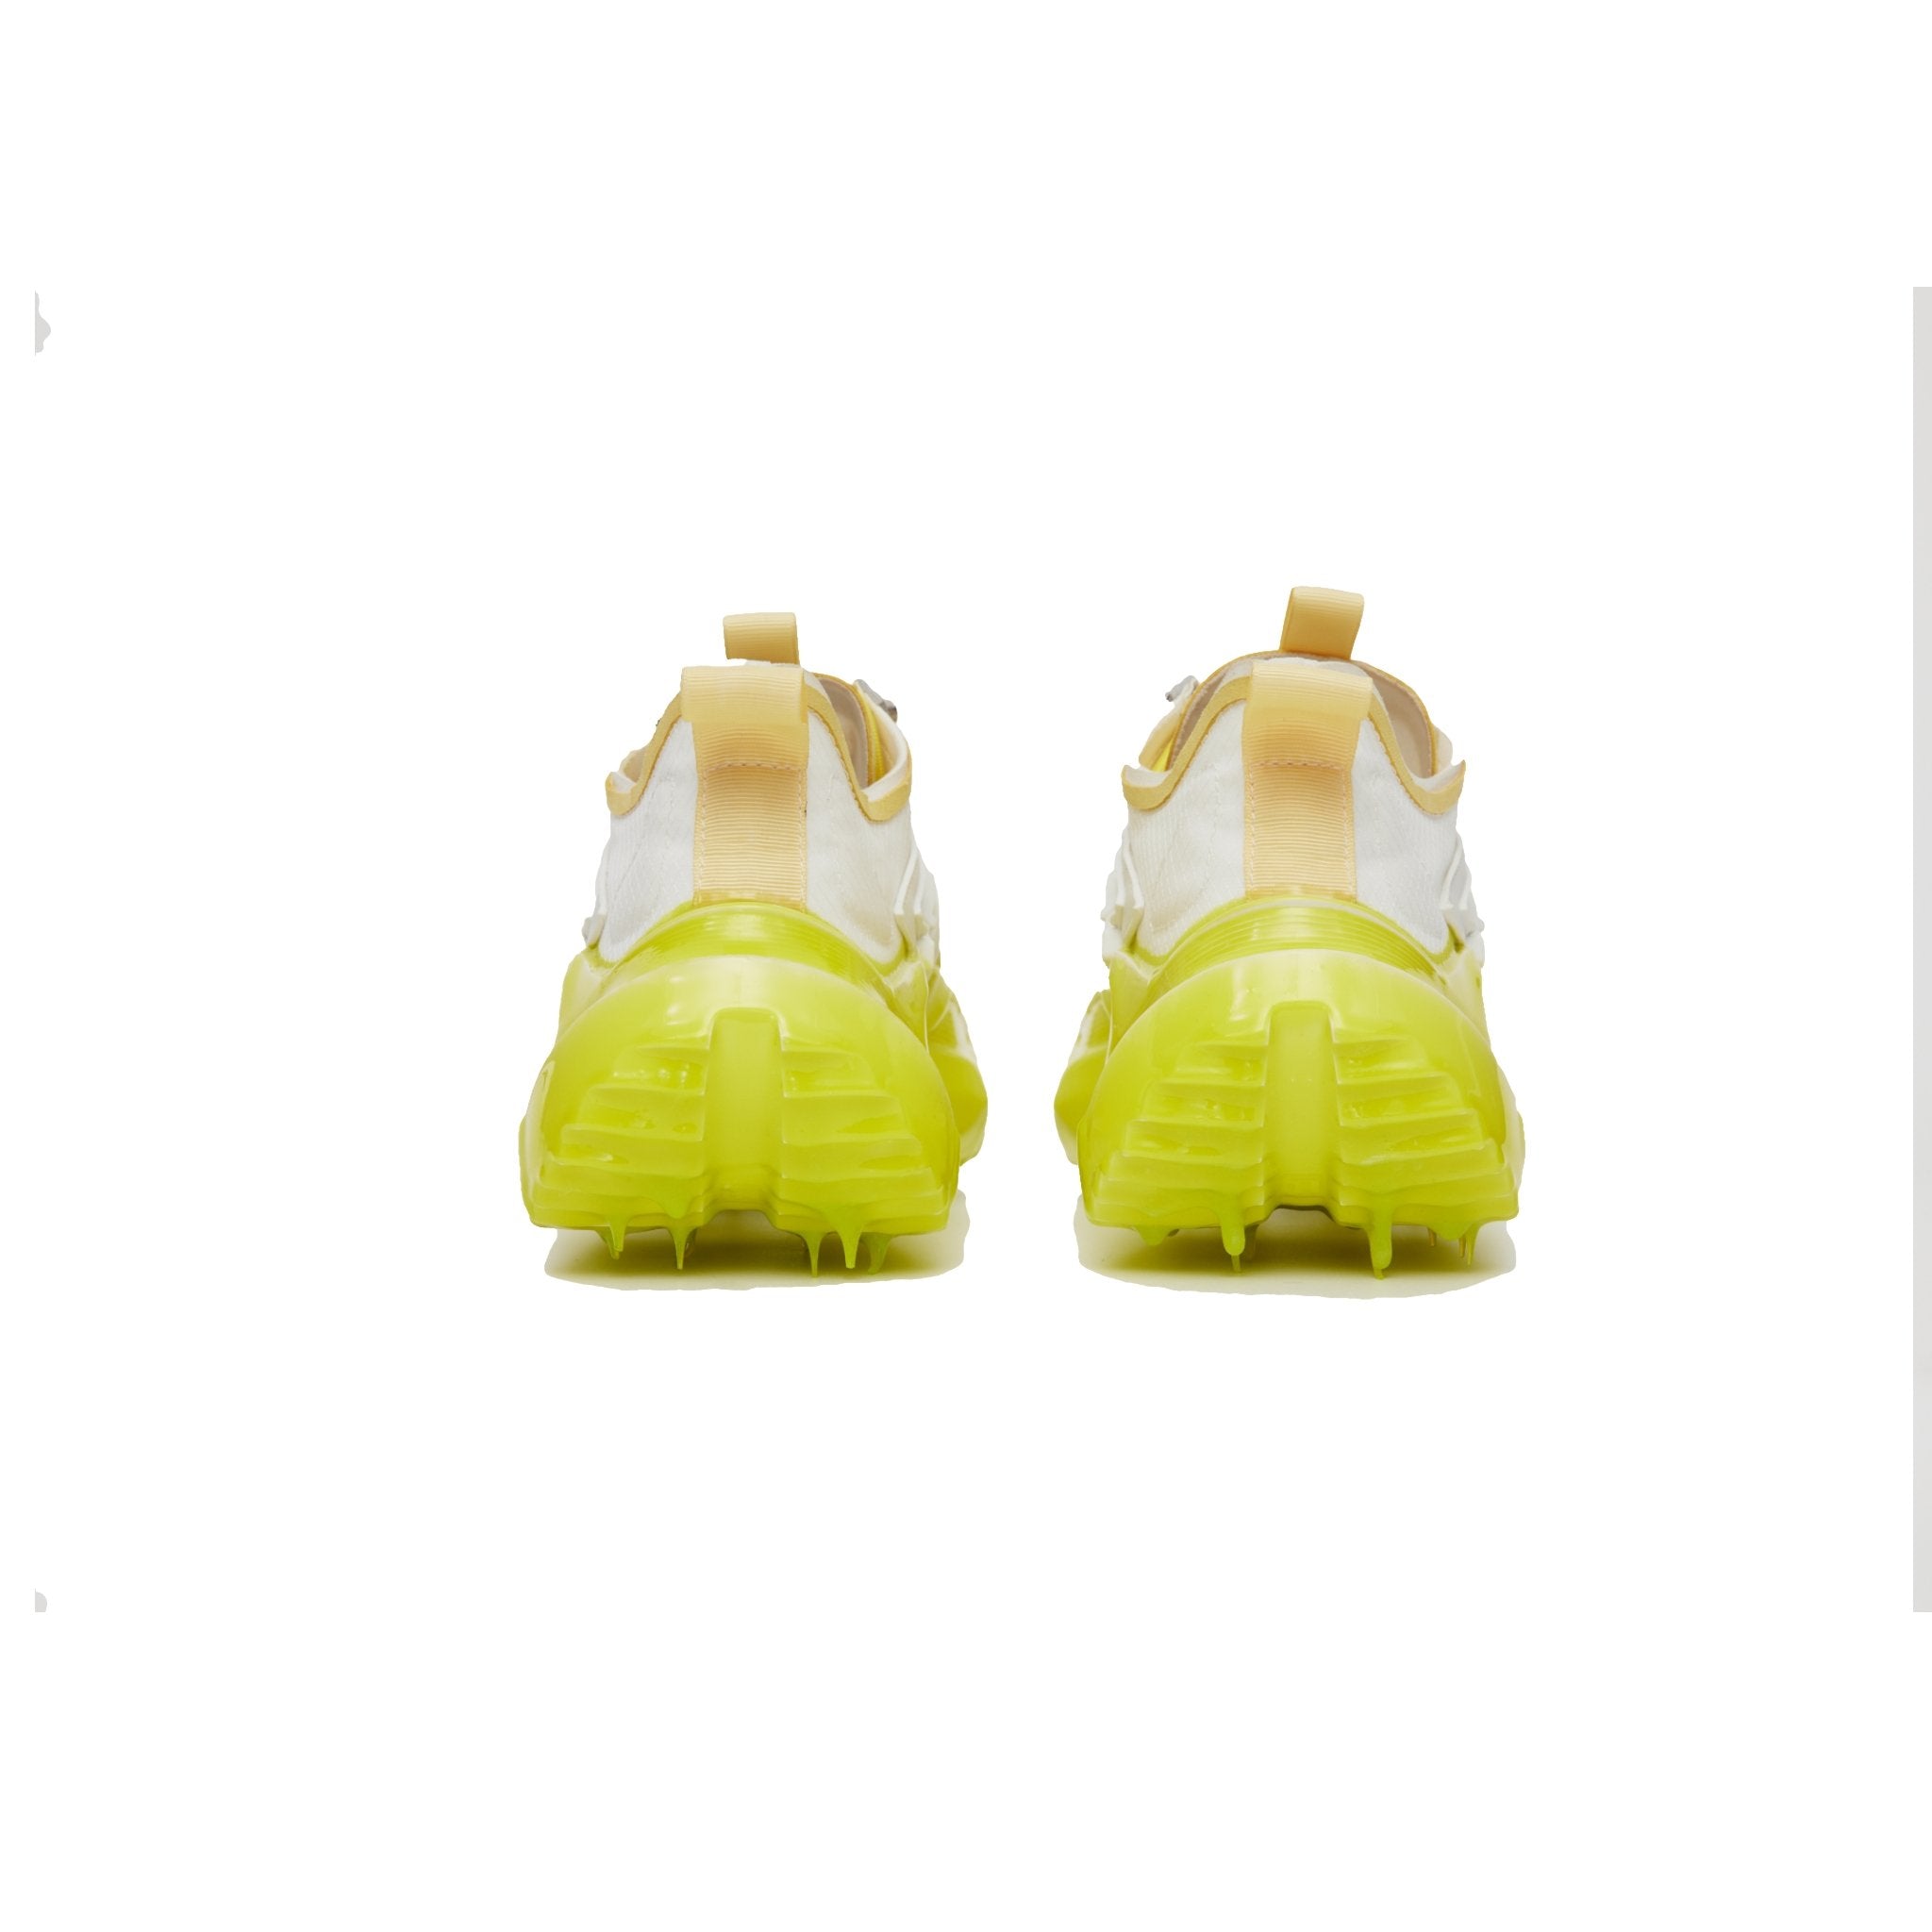 OGR MECHA Rong Classic 3D Sneaker Sand Yellow | MADA IN CHINA